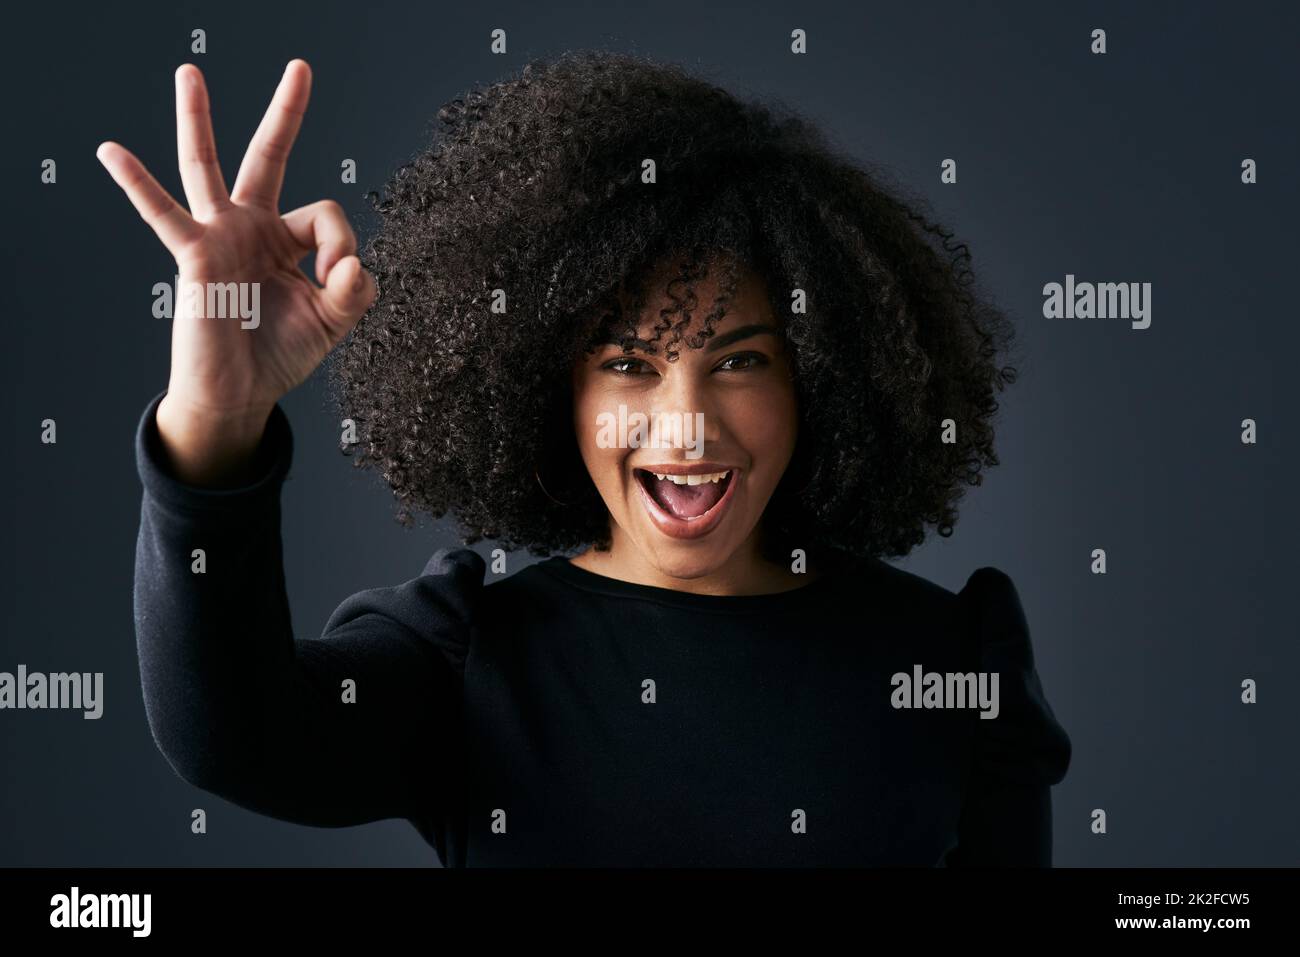 Being happy changes your world. Shot of a young businesswoman making hand gestures against a studio background. Stock Photo